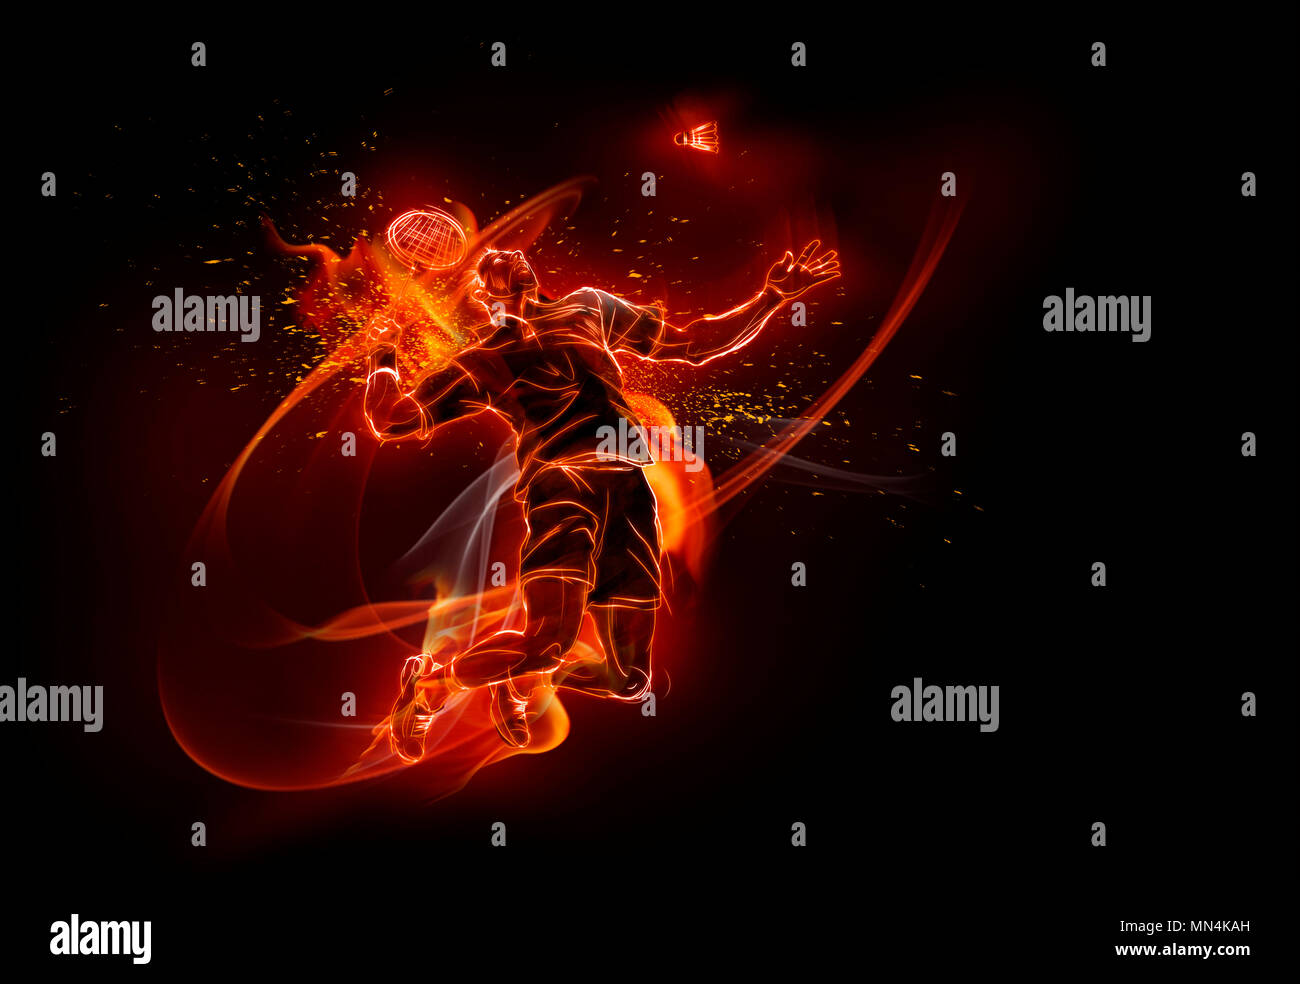 Computer generated image of male badminton player Stock Photo